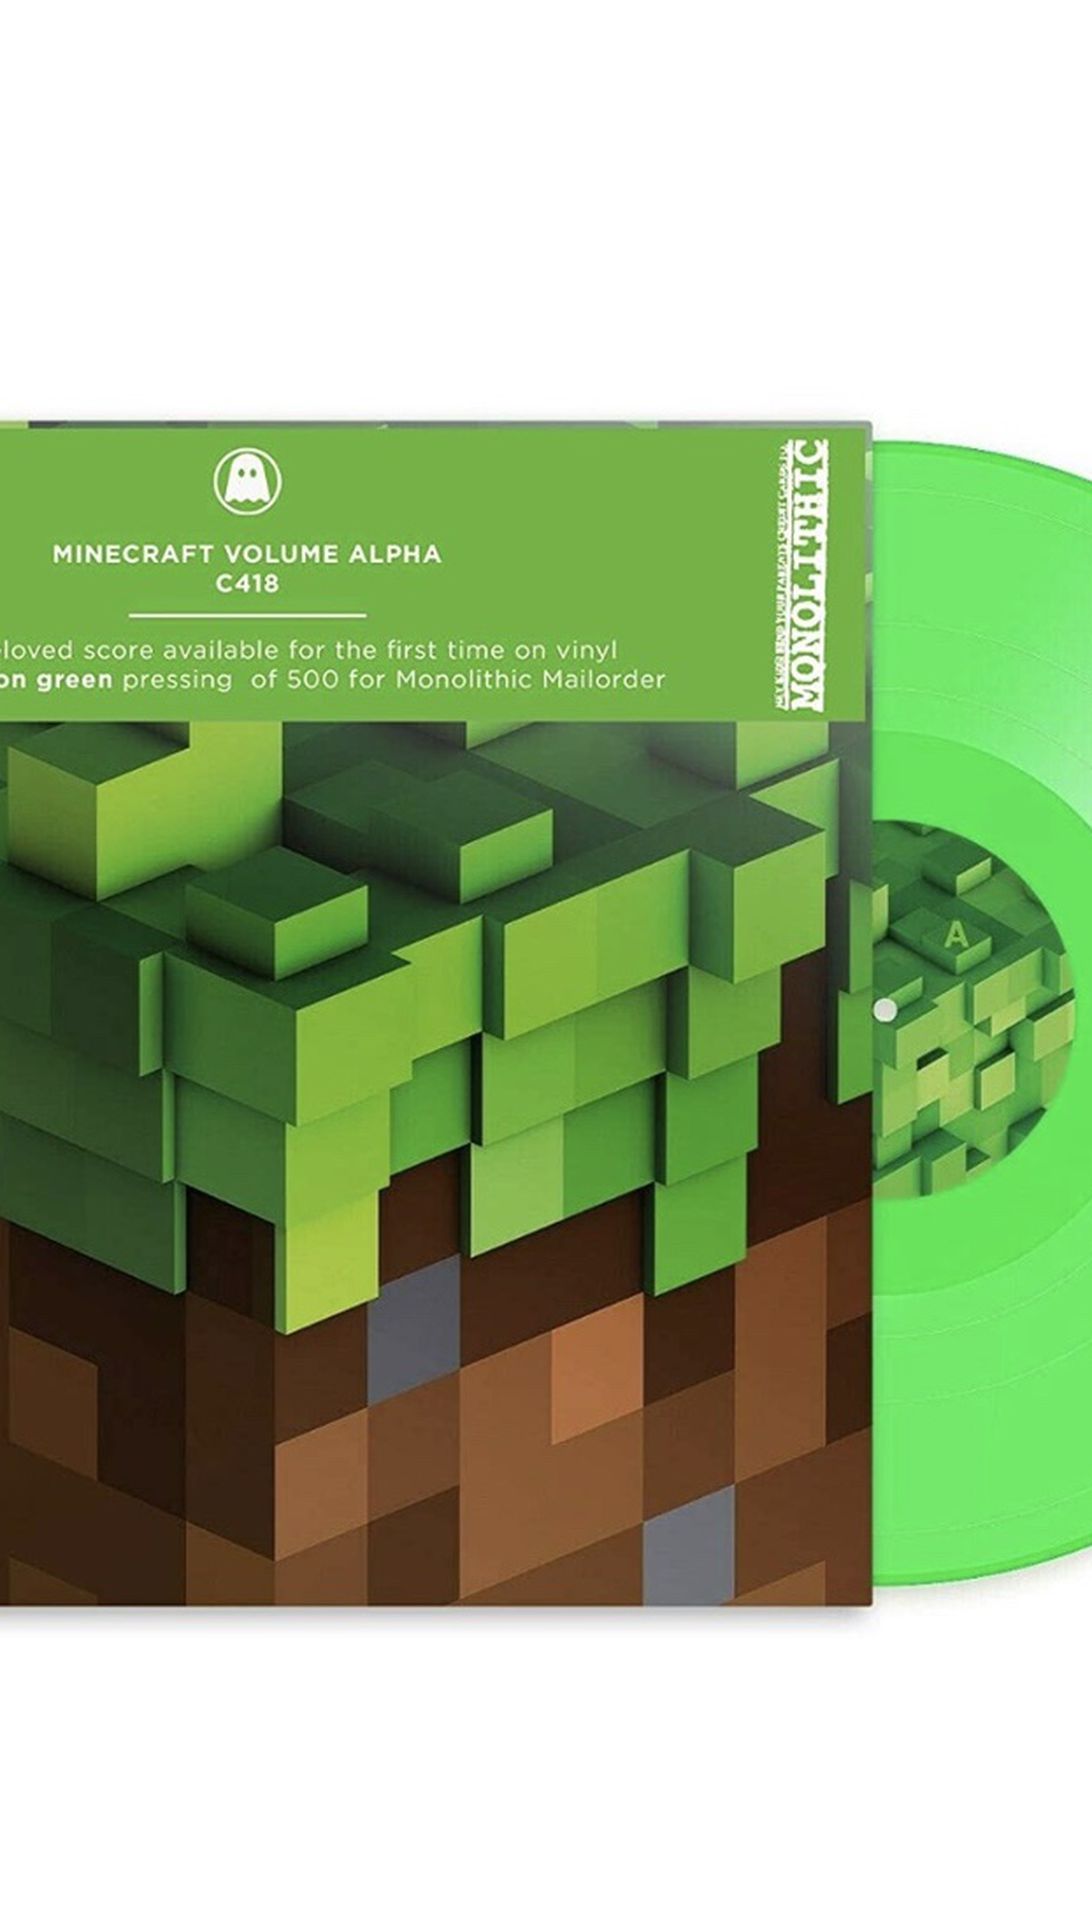 C418 Minecraft Volume Alpha - Exclusive Rare Edition NEON Green Monolithic Mail Order Only Vinyl LP (Only 500 Copies Pressed Worldwide) for Sale in WA - OfferUp